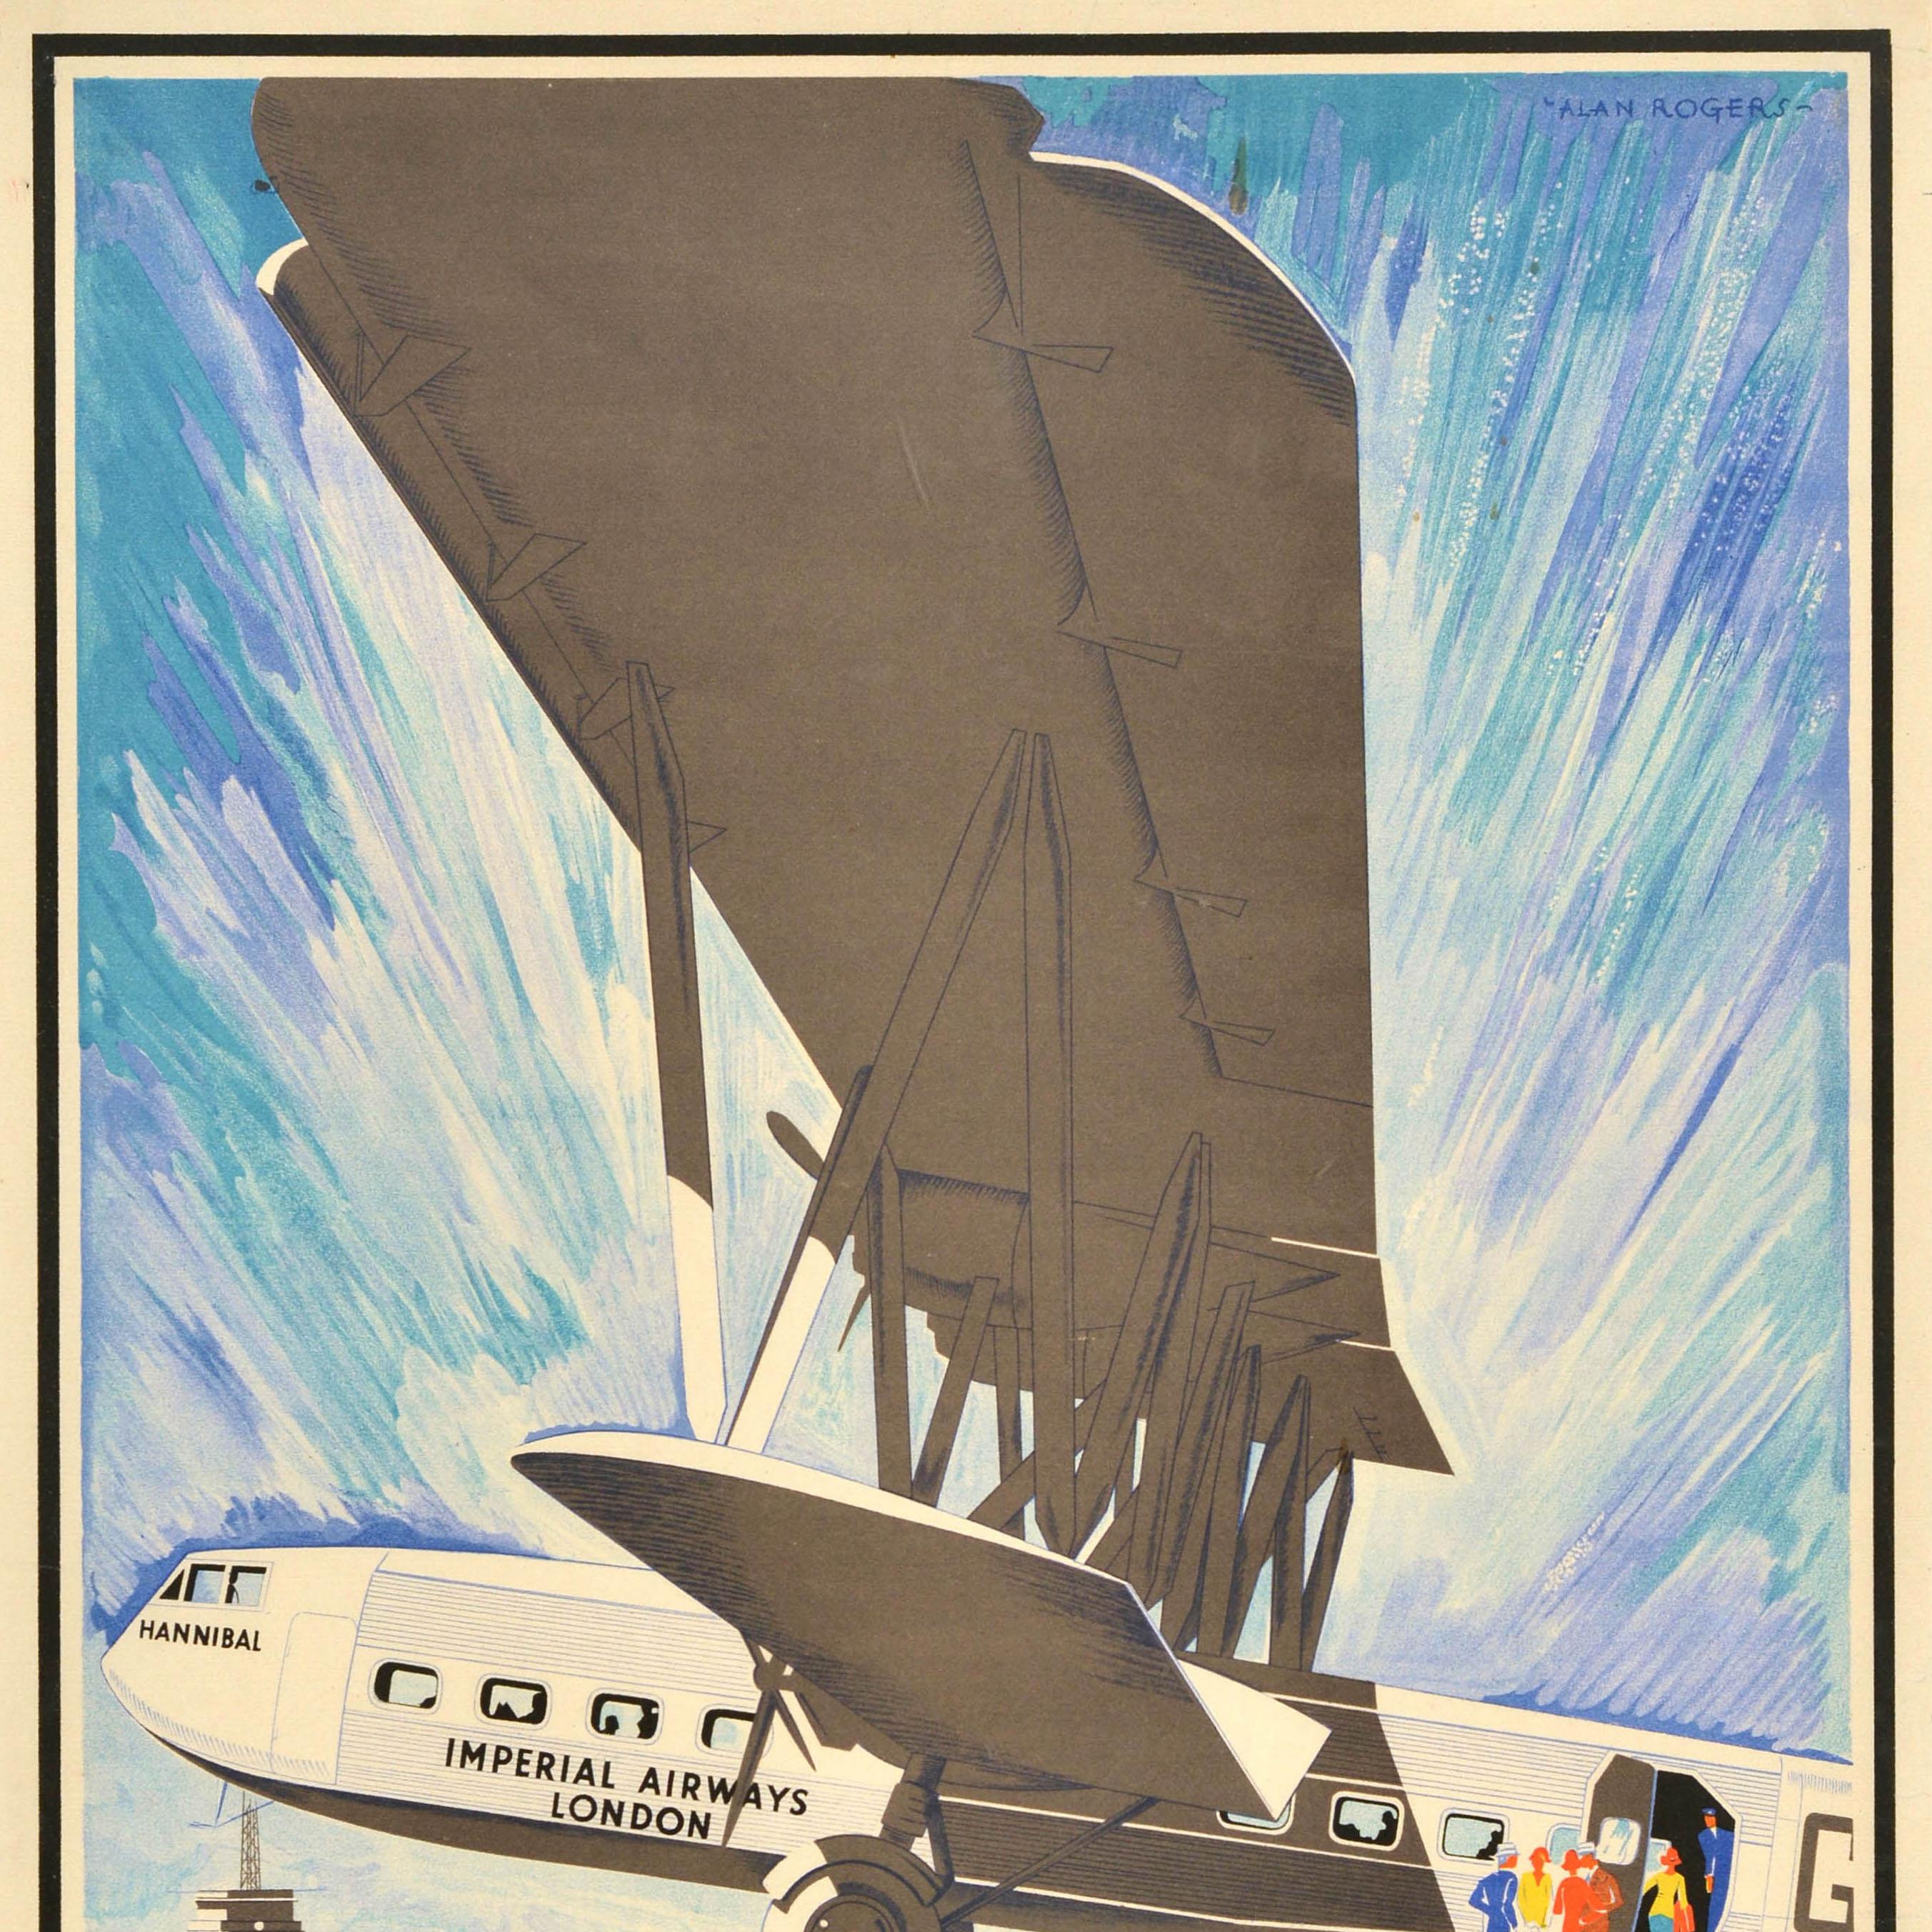 British Original Vintage Travel Advertising Poster Imperial Airways Largest Air Liners For Sale